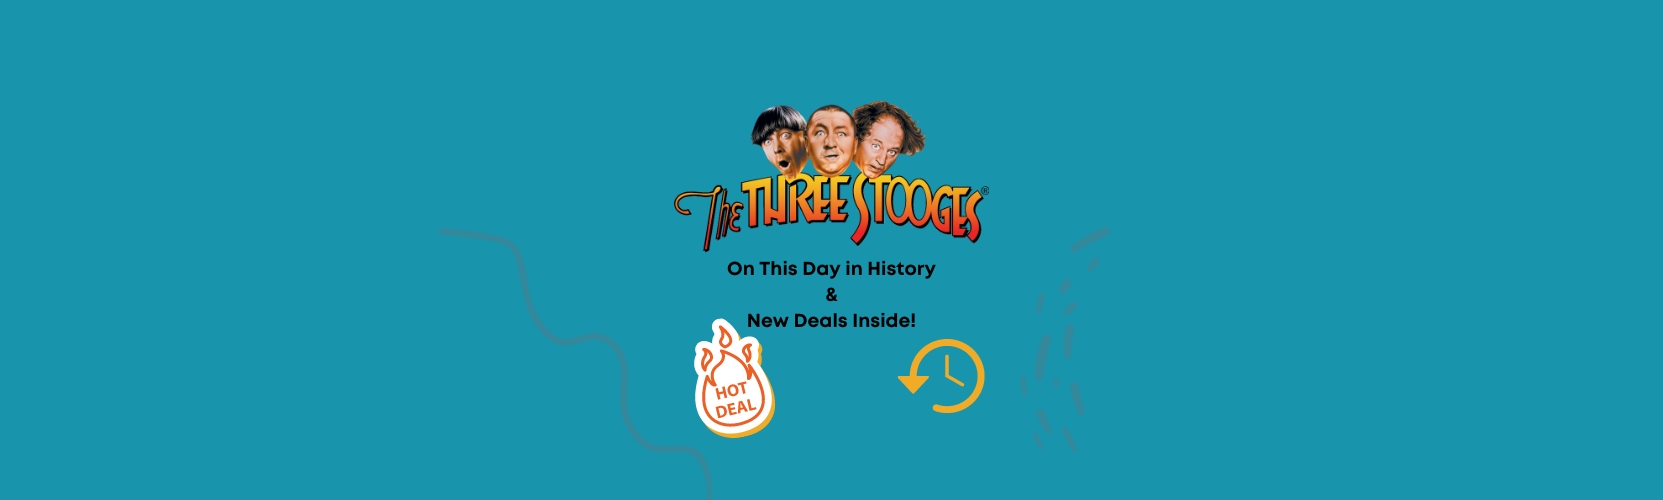 ShopKnuckleheads: On This Day in History & New Deals!